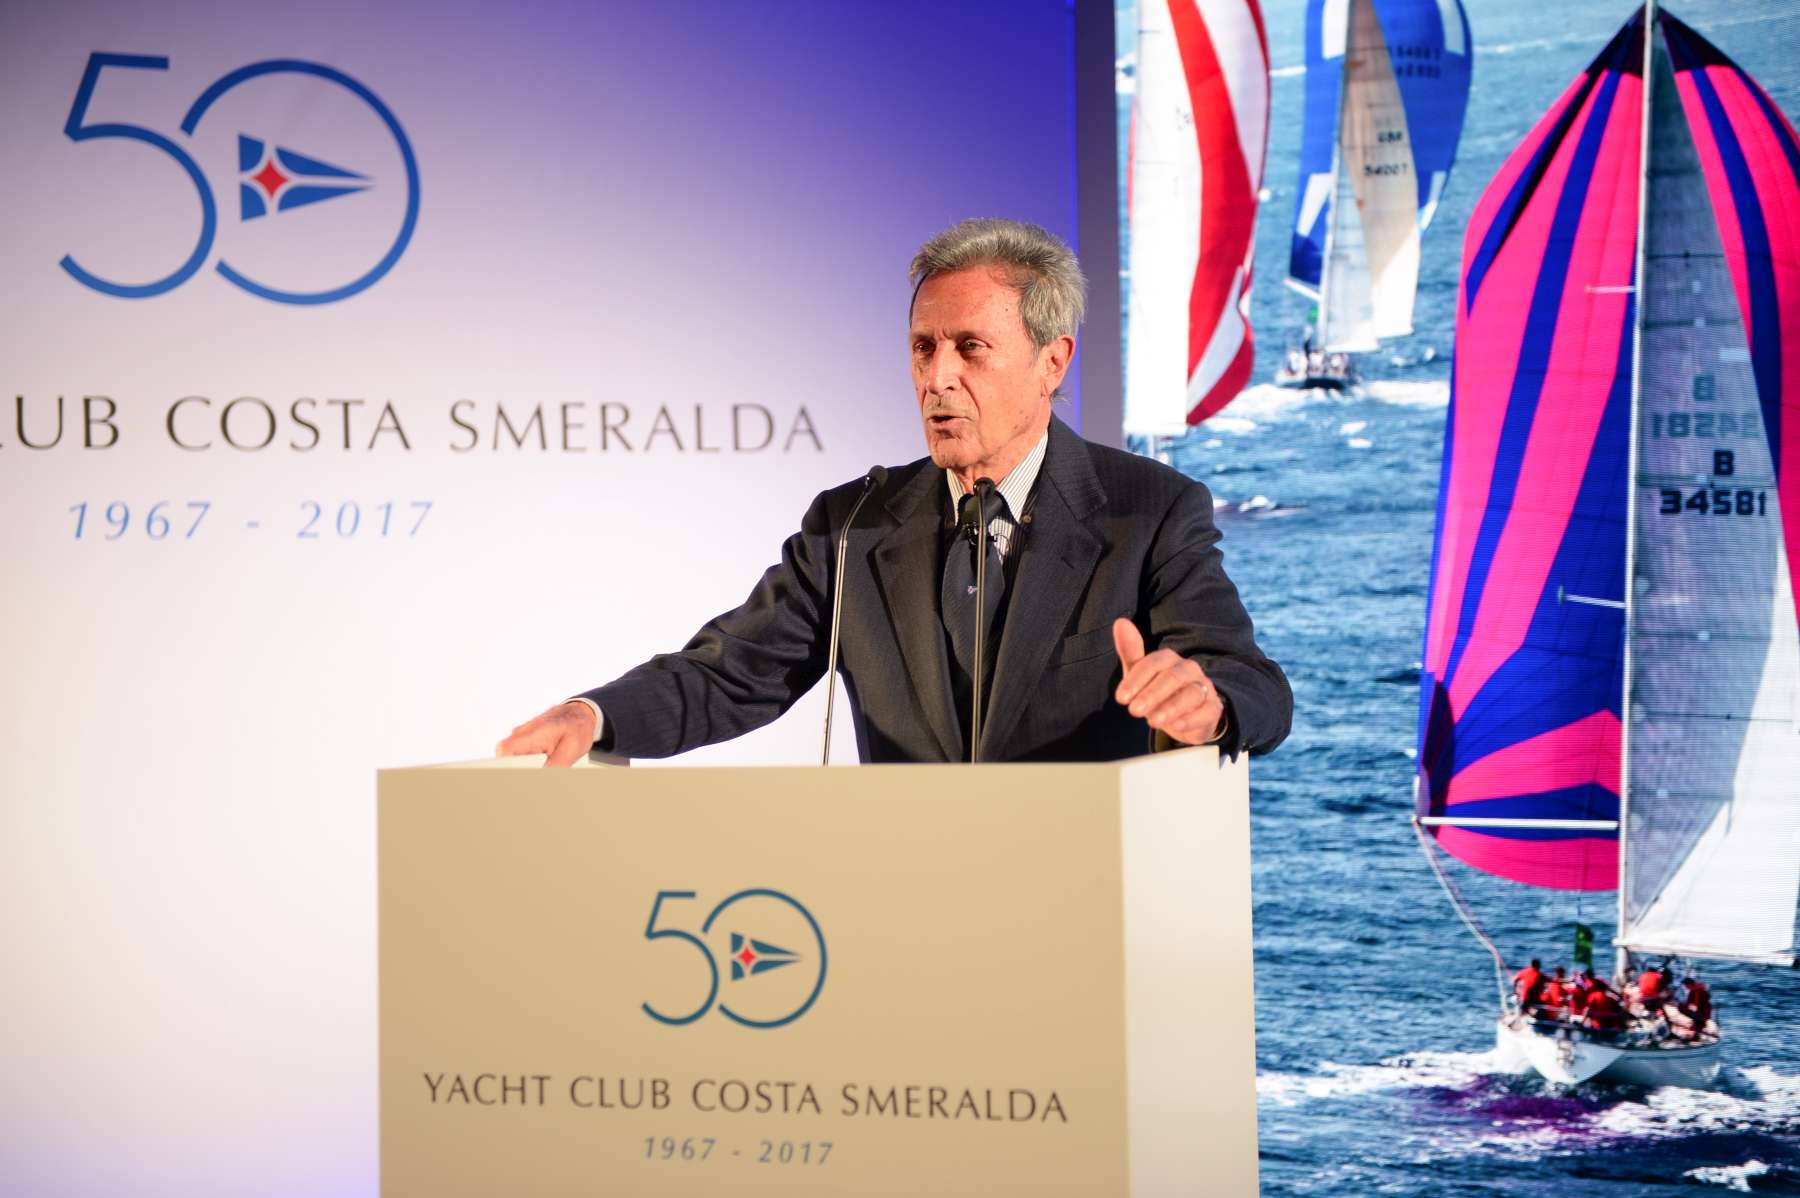 FIFTIETH ANNIVERSARY YEAR FOR THE YACHT CLUB COSTA SMERALDA - NEWS - Yacht Club Costa Smeralda